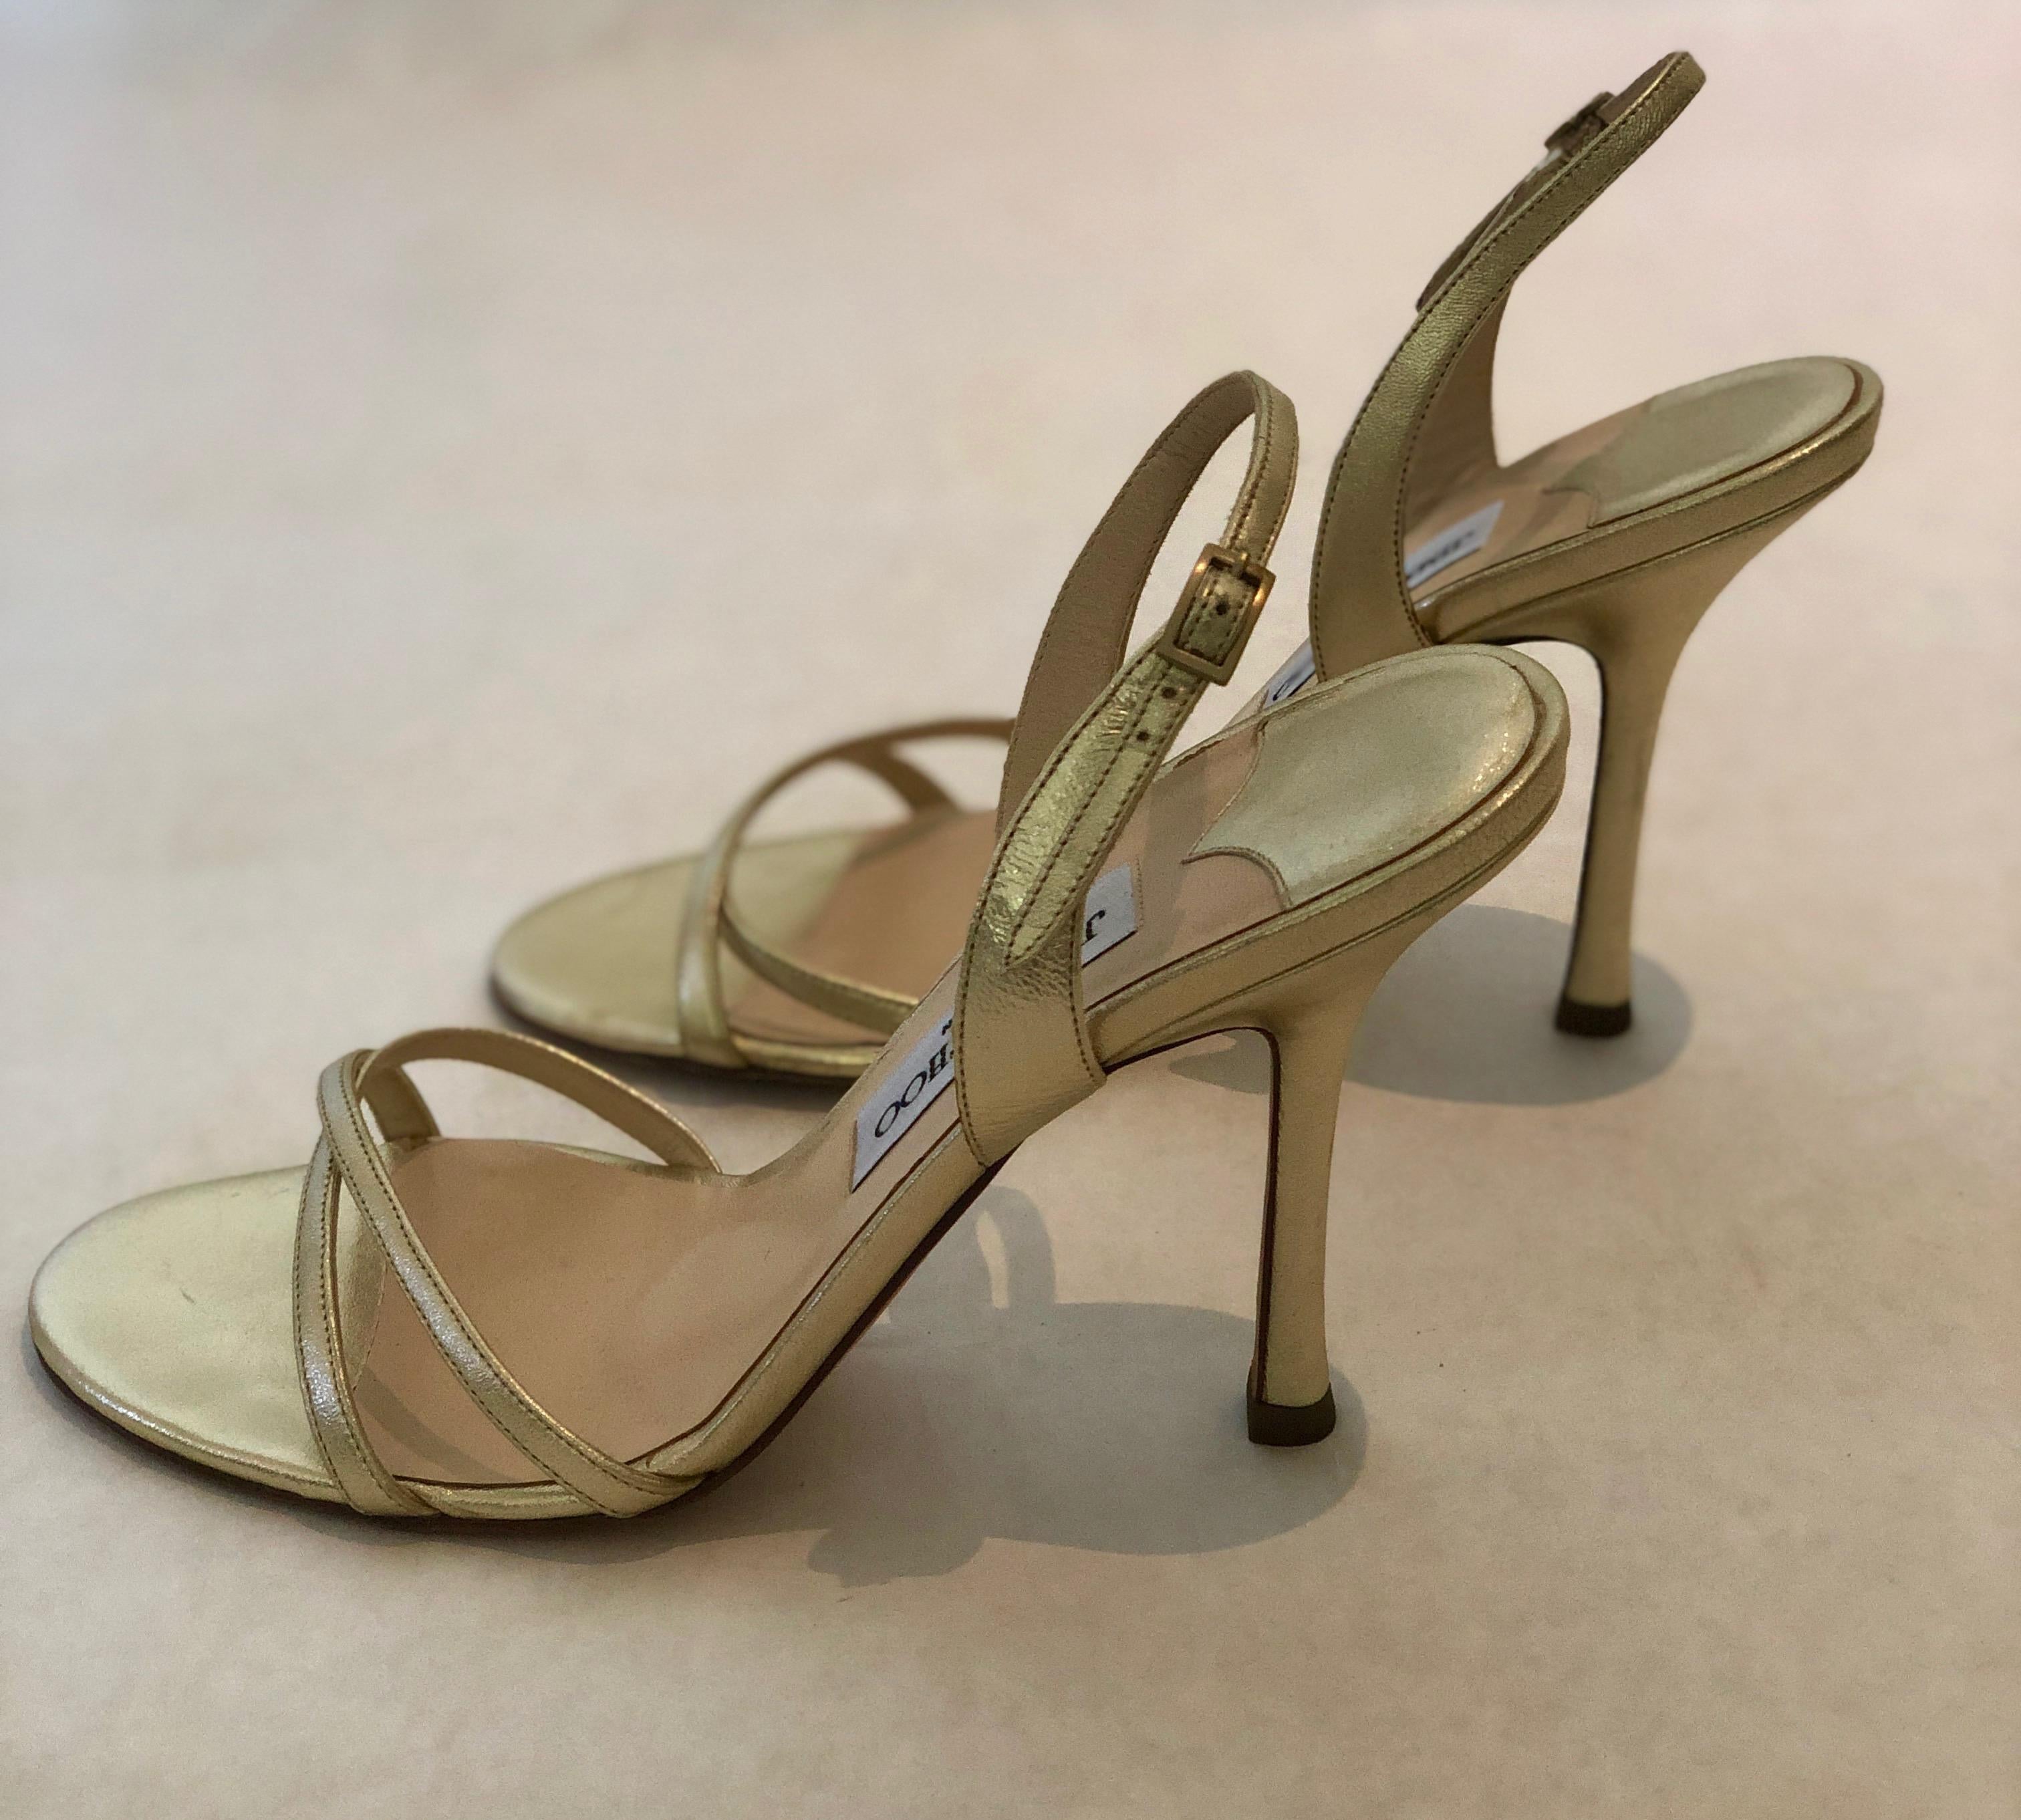 Pair of Jimmy Choo Lance Strappy Metallic Gold Stiletto Leather Sandal  For Sale 1